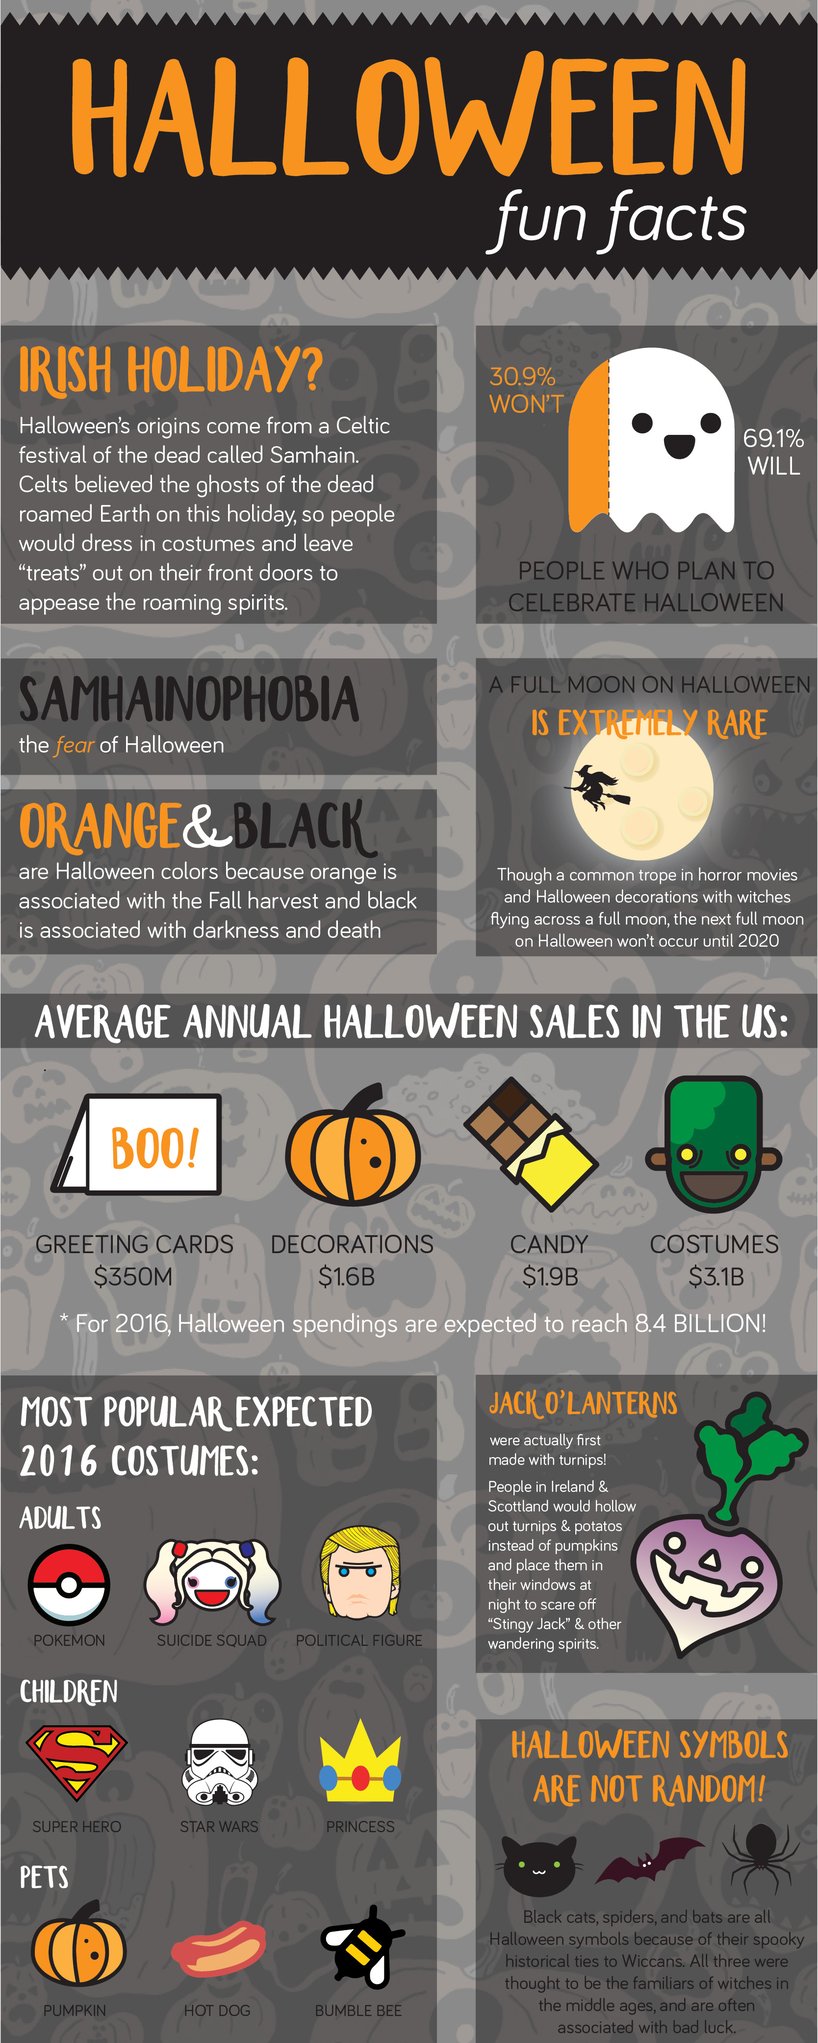 Halloween Infographic - TPI Solutions Ink